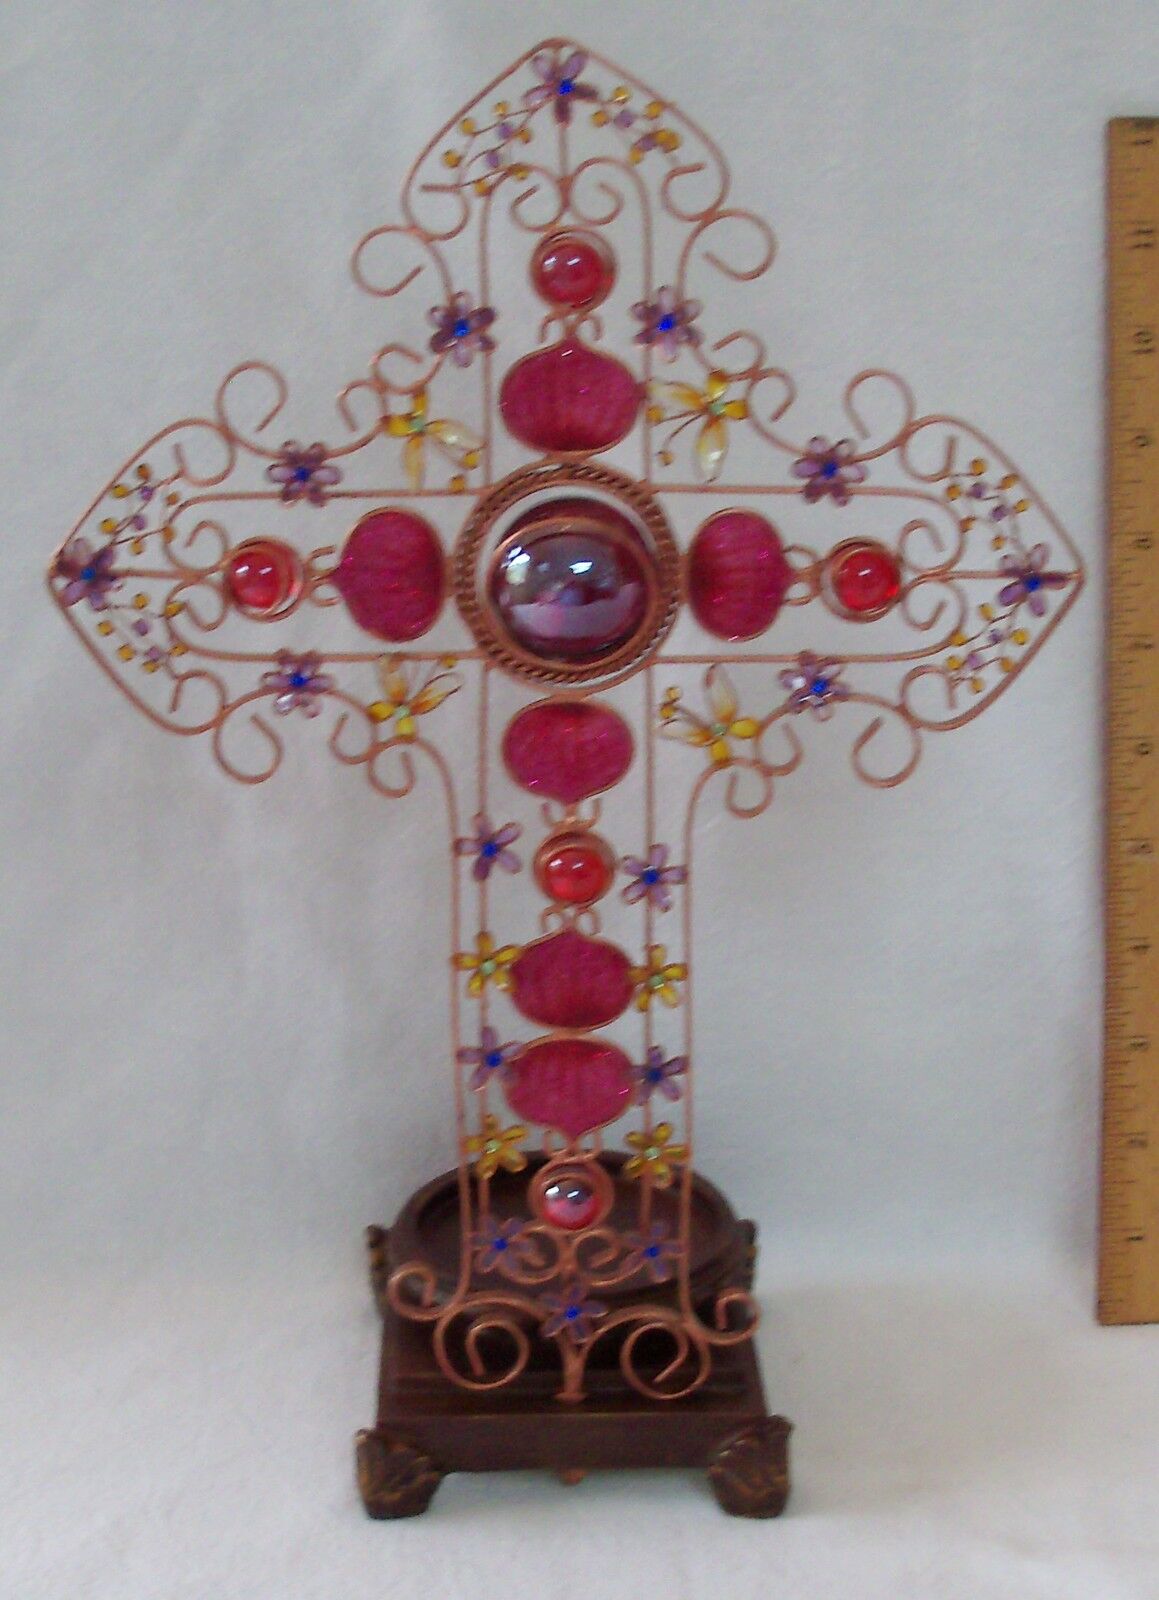 COPPER PLATED CROSS Ranking TOP9 FIGURE CANDLEHOLDER New Free Shipping W LOOK STAINED GLASS